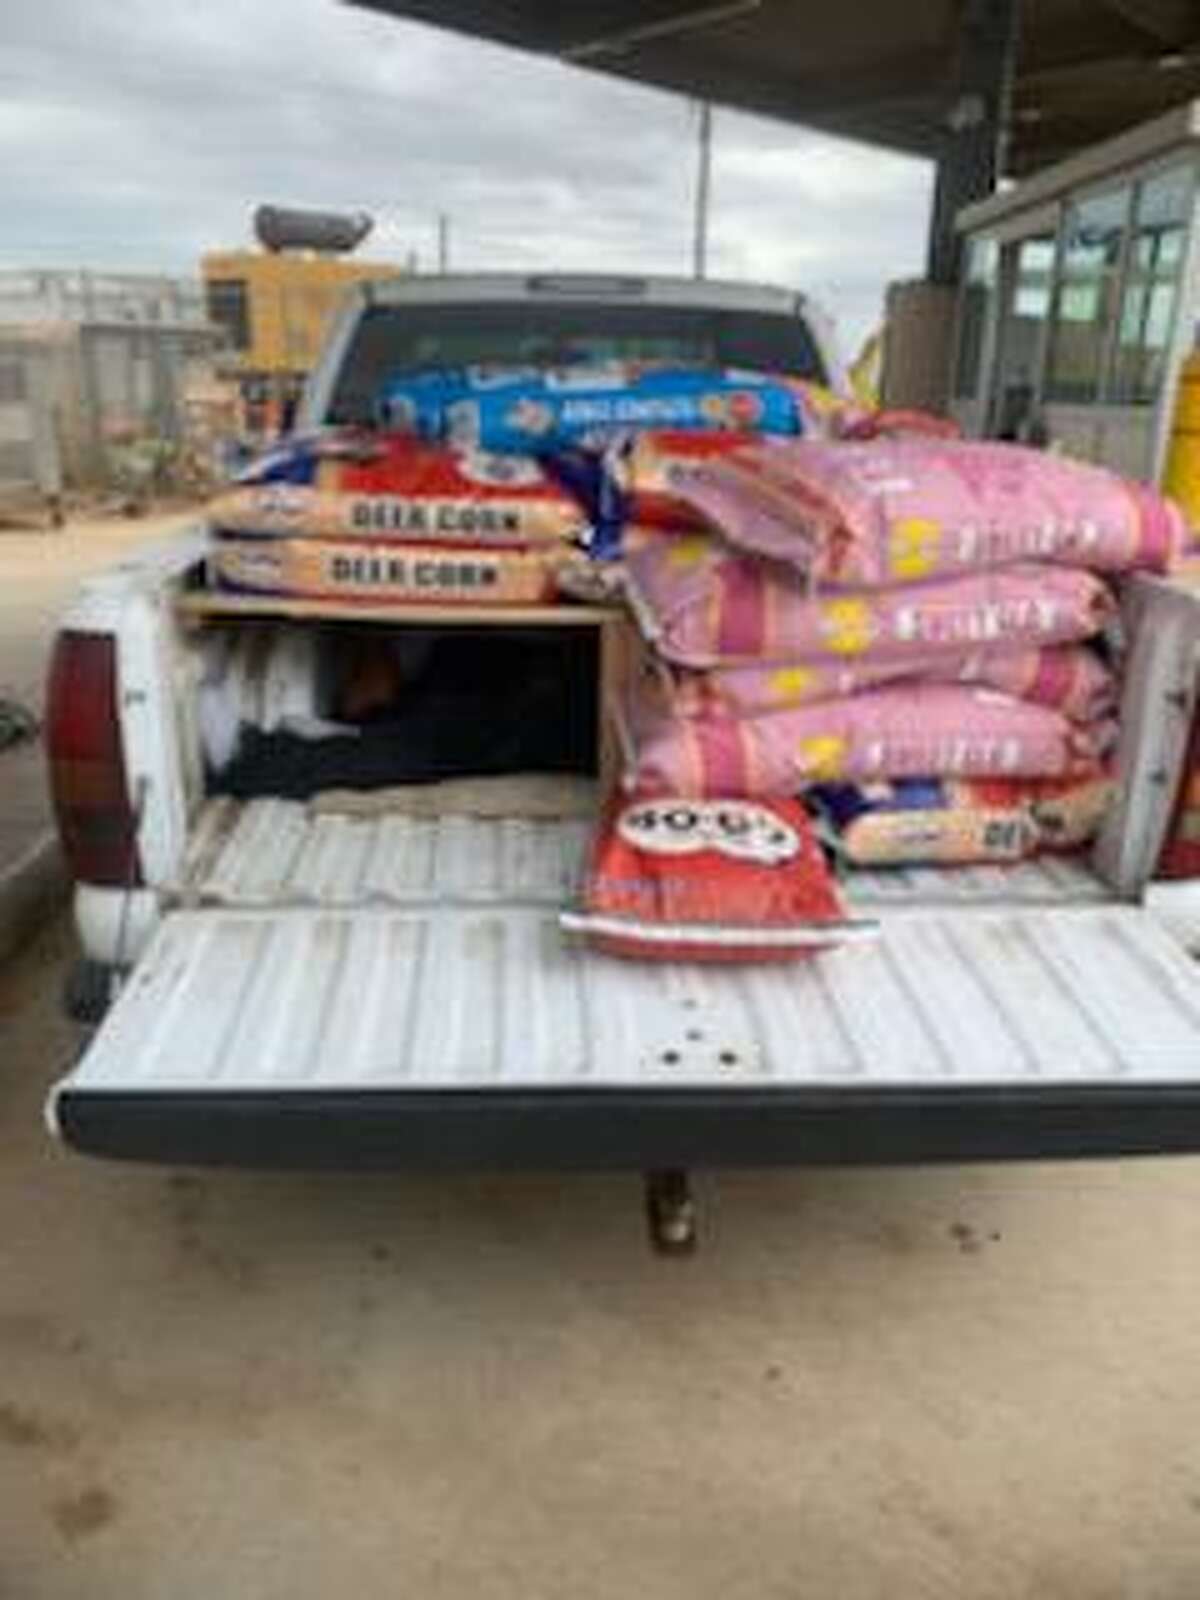 U.S. Border patrol agents found four people inside a compartment hidden underneath bags of deer corn, horse feed and dog food. The individuals were determined to be immigrants who had crossed the border illegally.